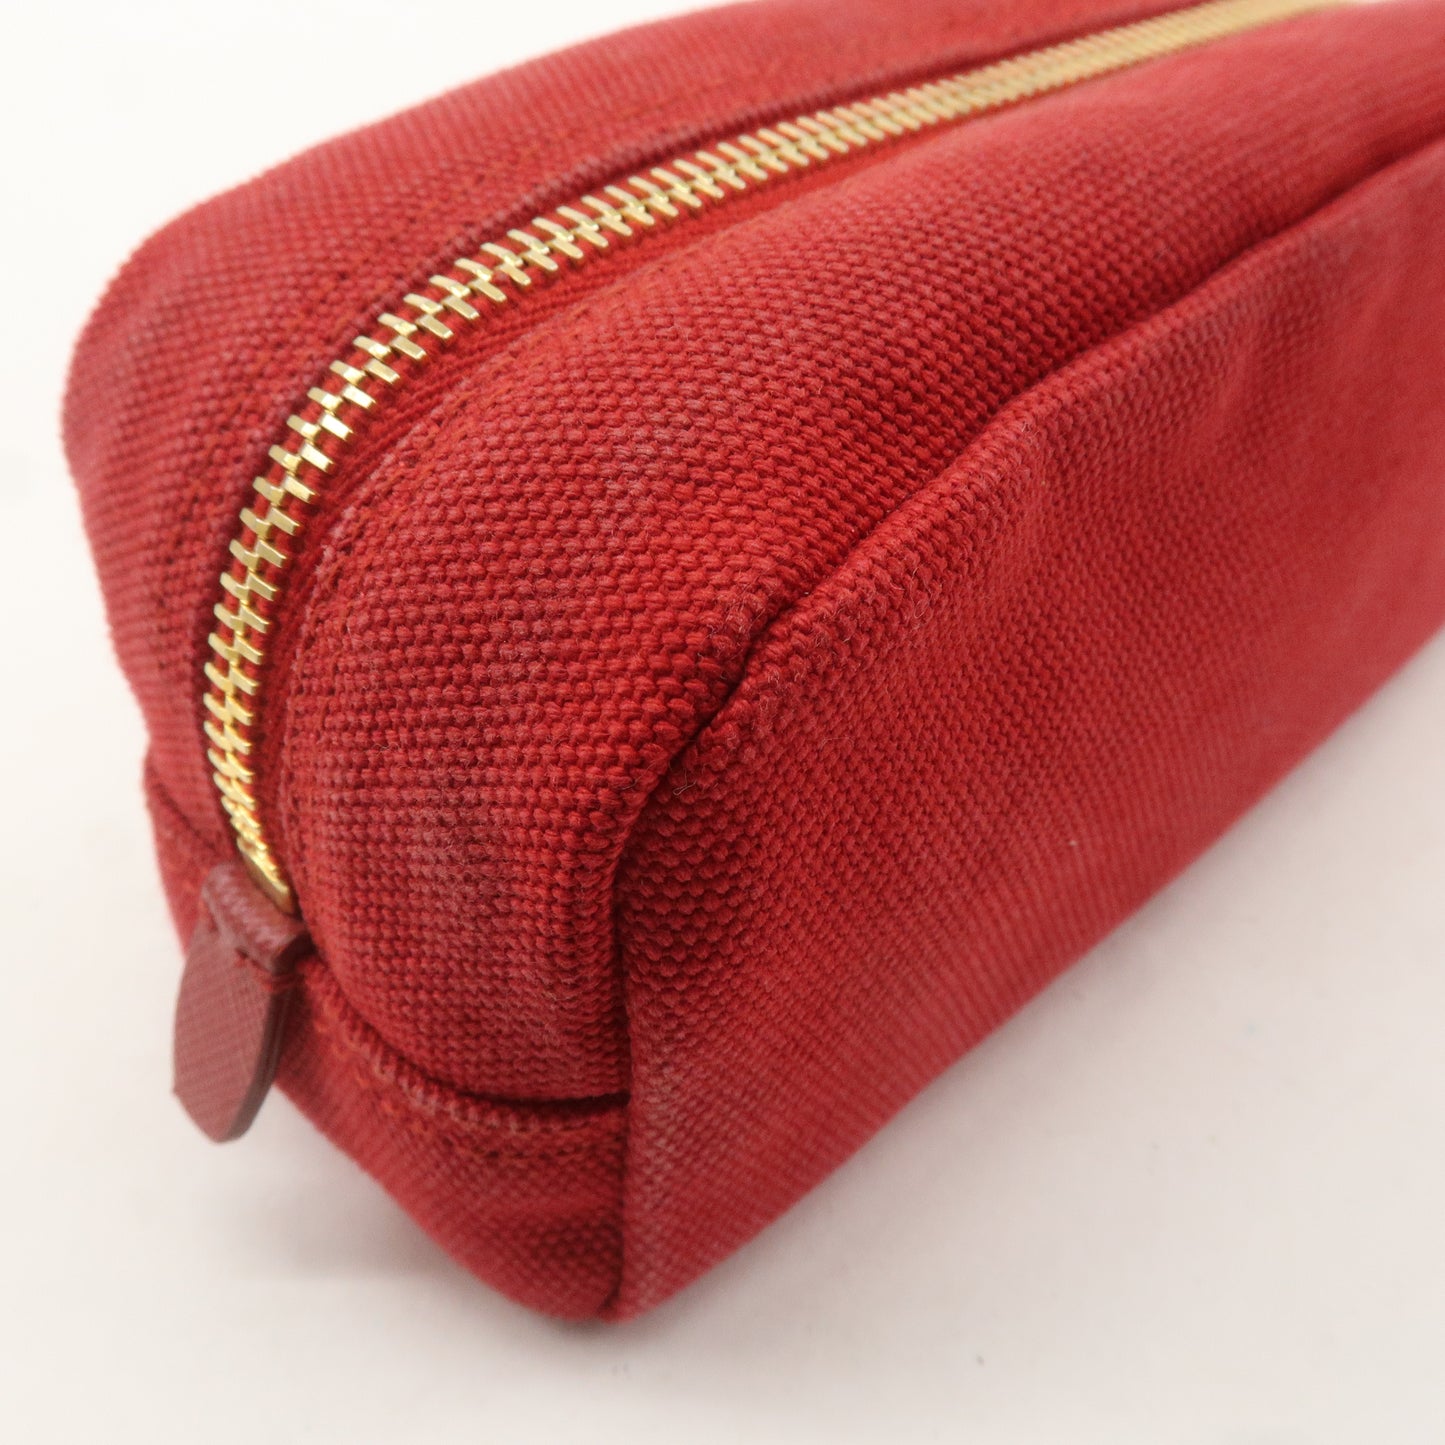 PRADA Logo Canvas Leather Pouch Cosmetic Pouch Red